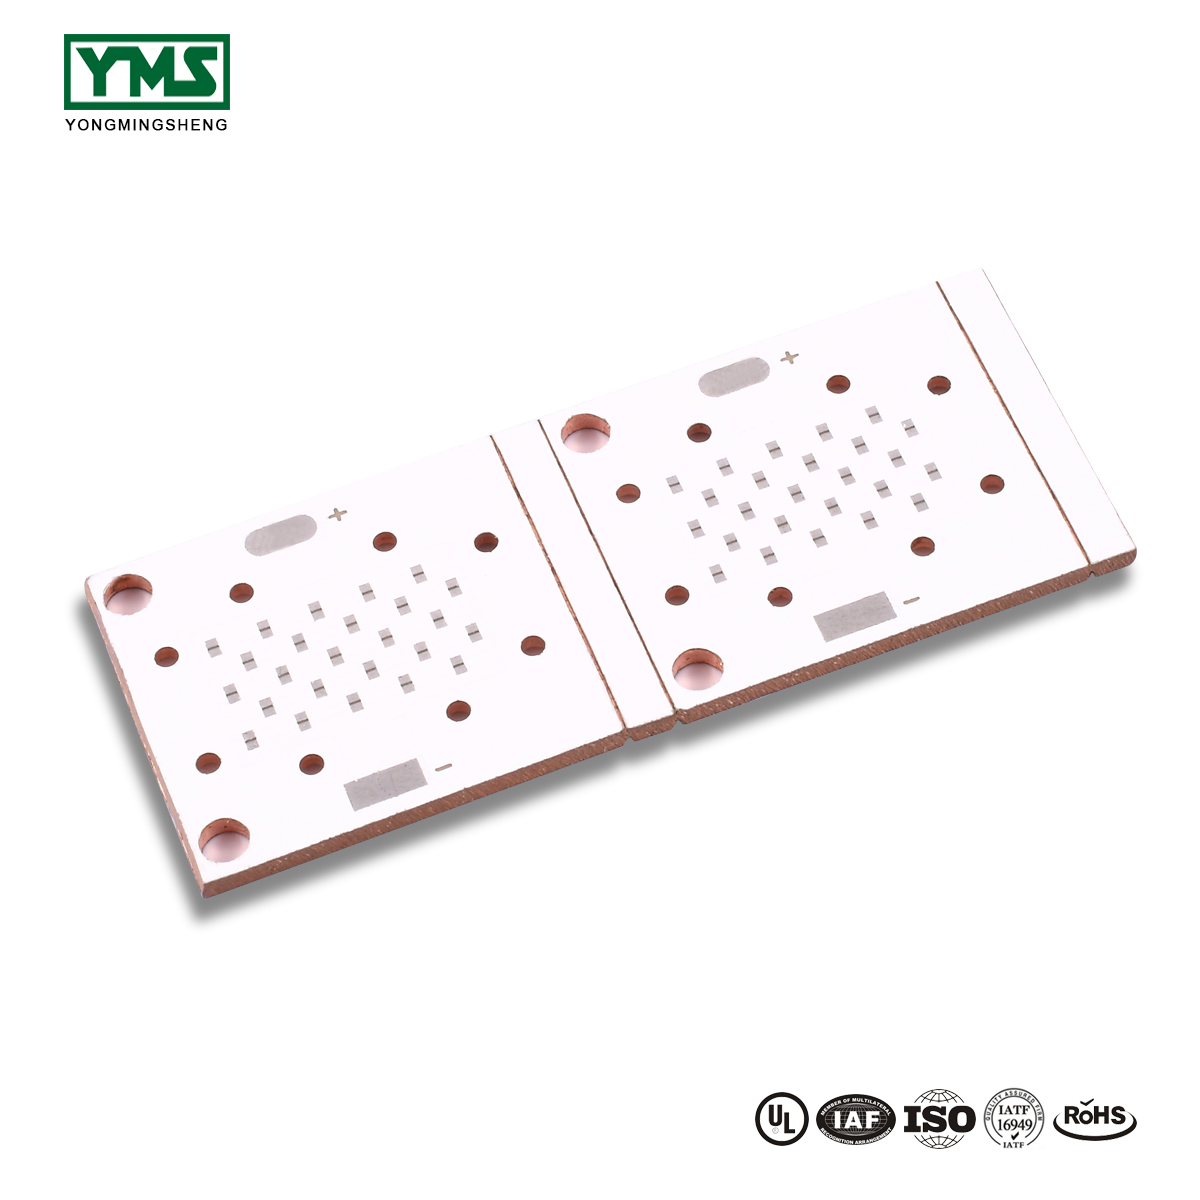 Discount Price Cigarette Pcb Printed Circuit Board - 1 Layer Thermoelectric Copper base Board | YMSPCB – Yongmingsheng